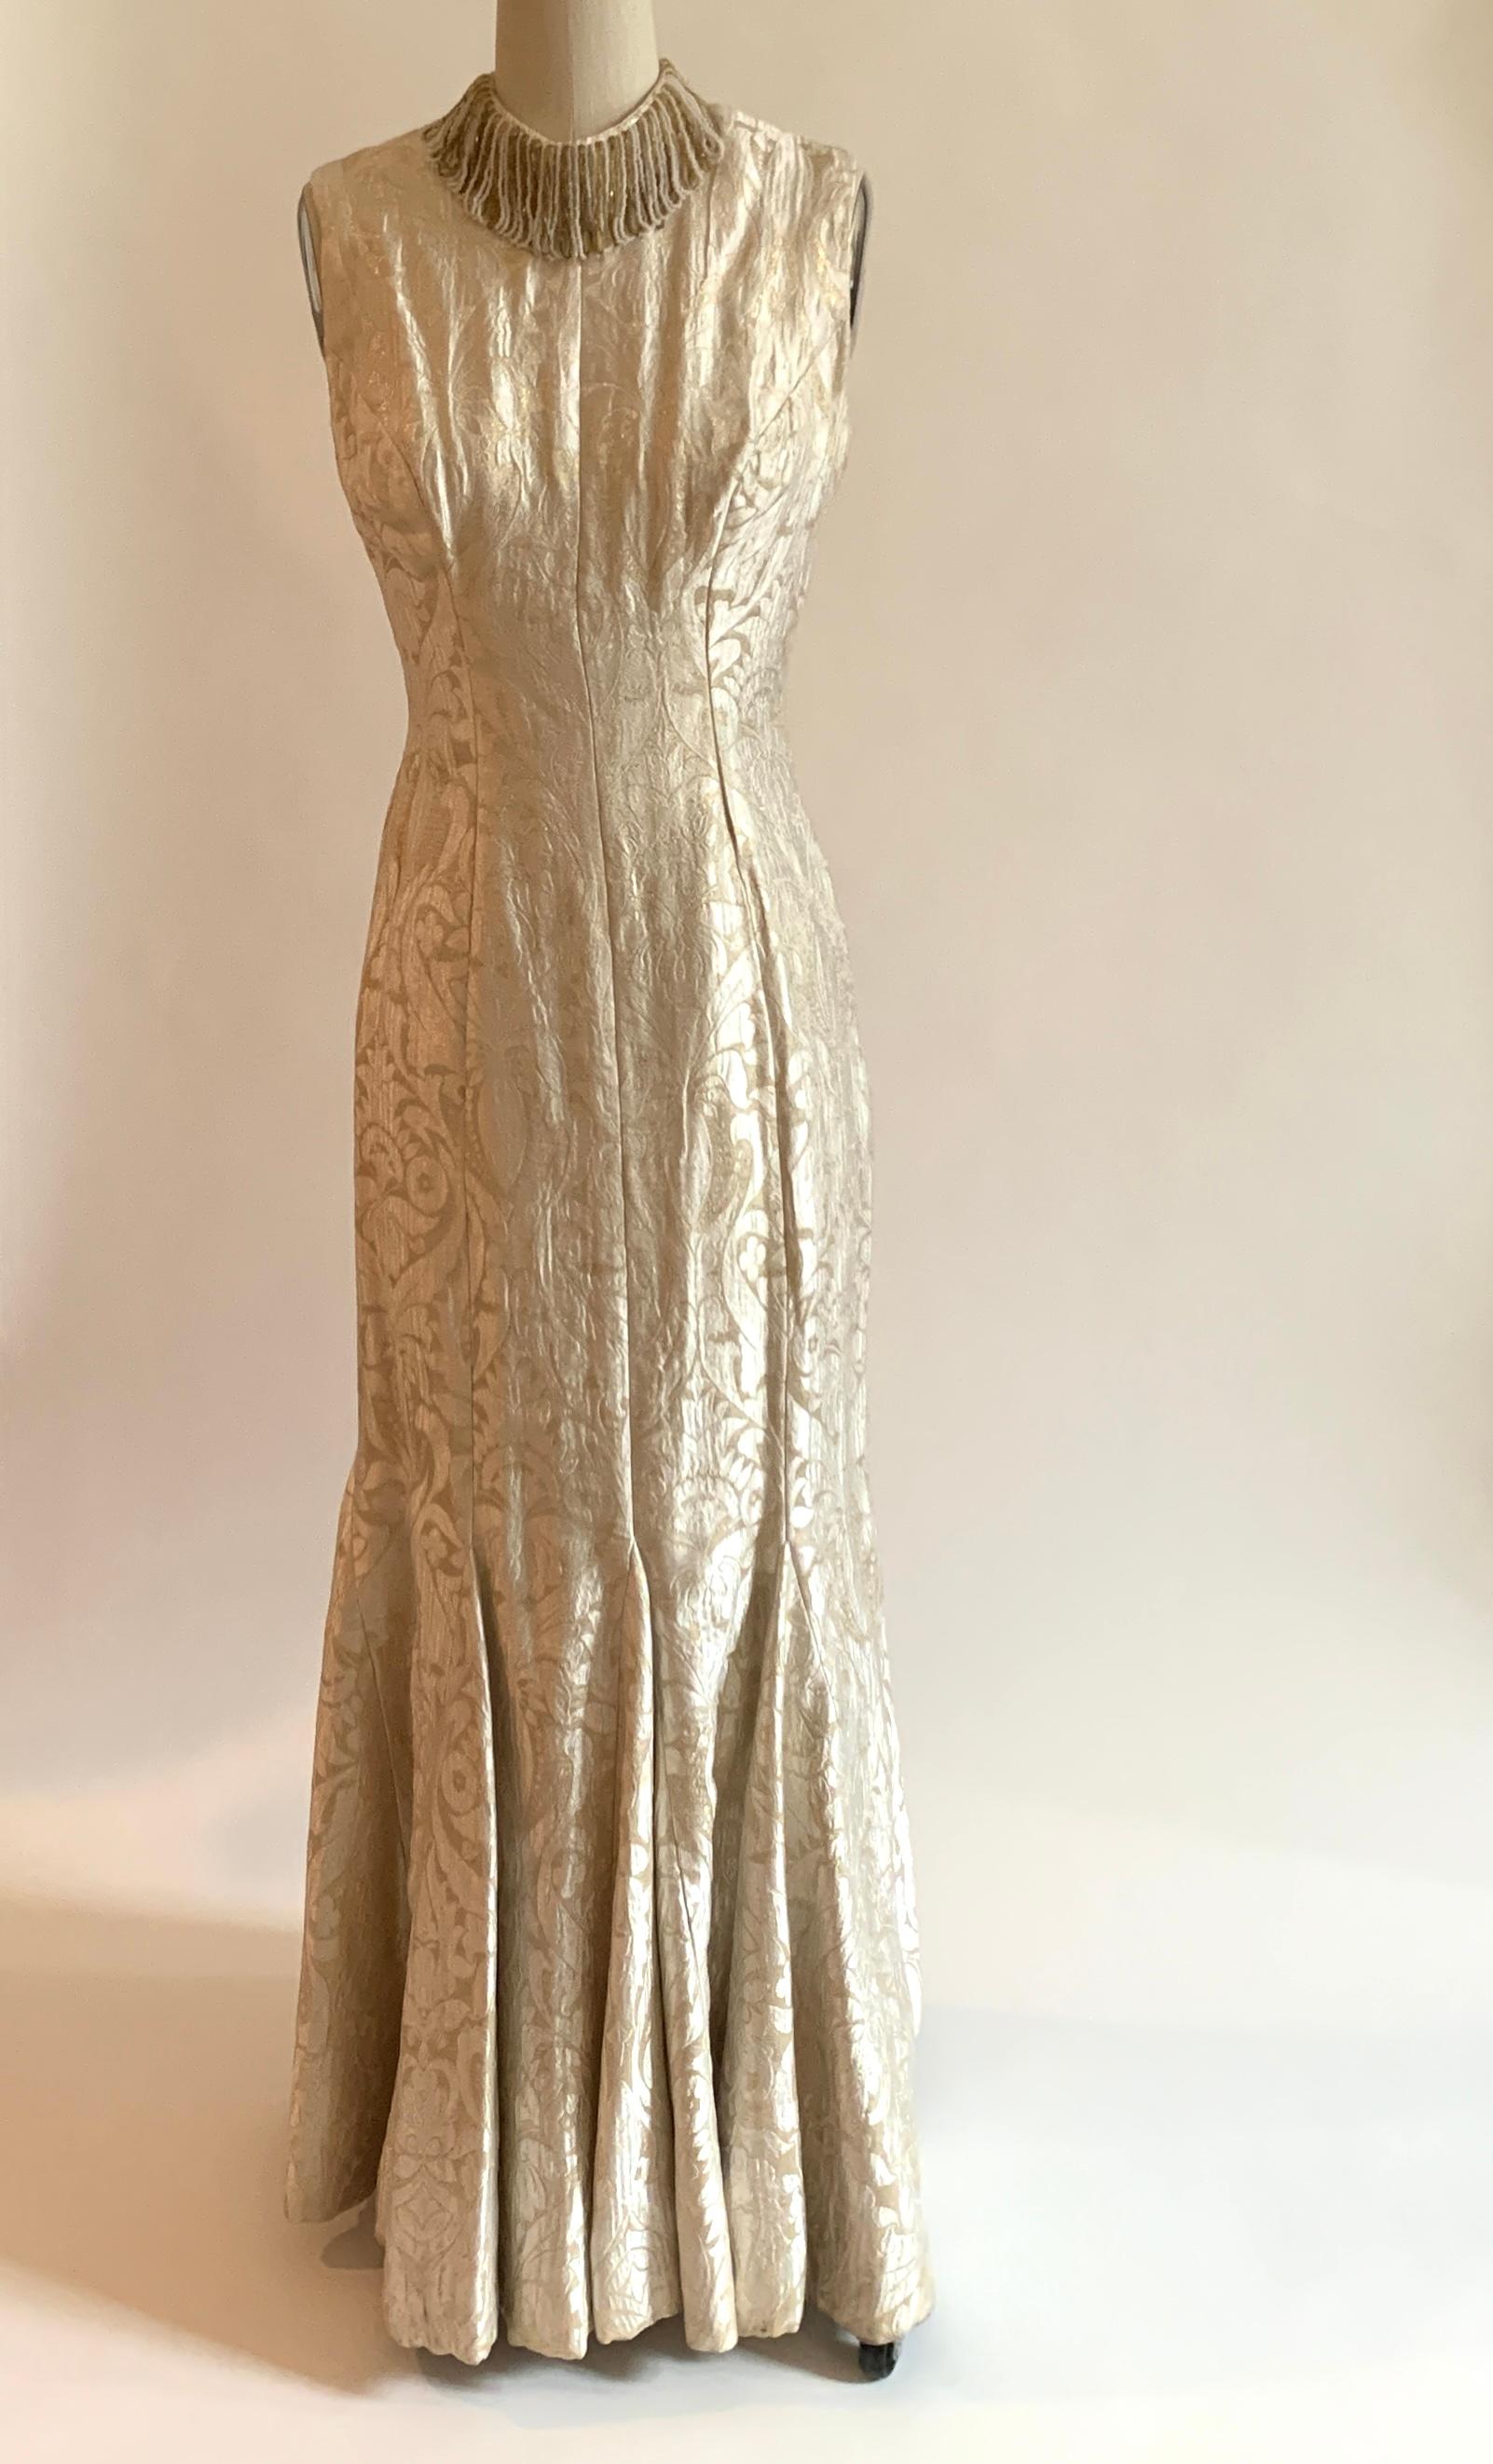 Stunning vintage 1960s sleeveless fluted gown and coat set set in cream and pale gold brocade. Gown has a beautiful fit and flare shape with a deep scoop back and beading at neck. Lined in silky material. 

Coat features mid length sleeves , a